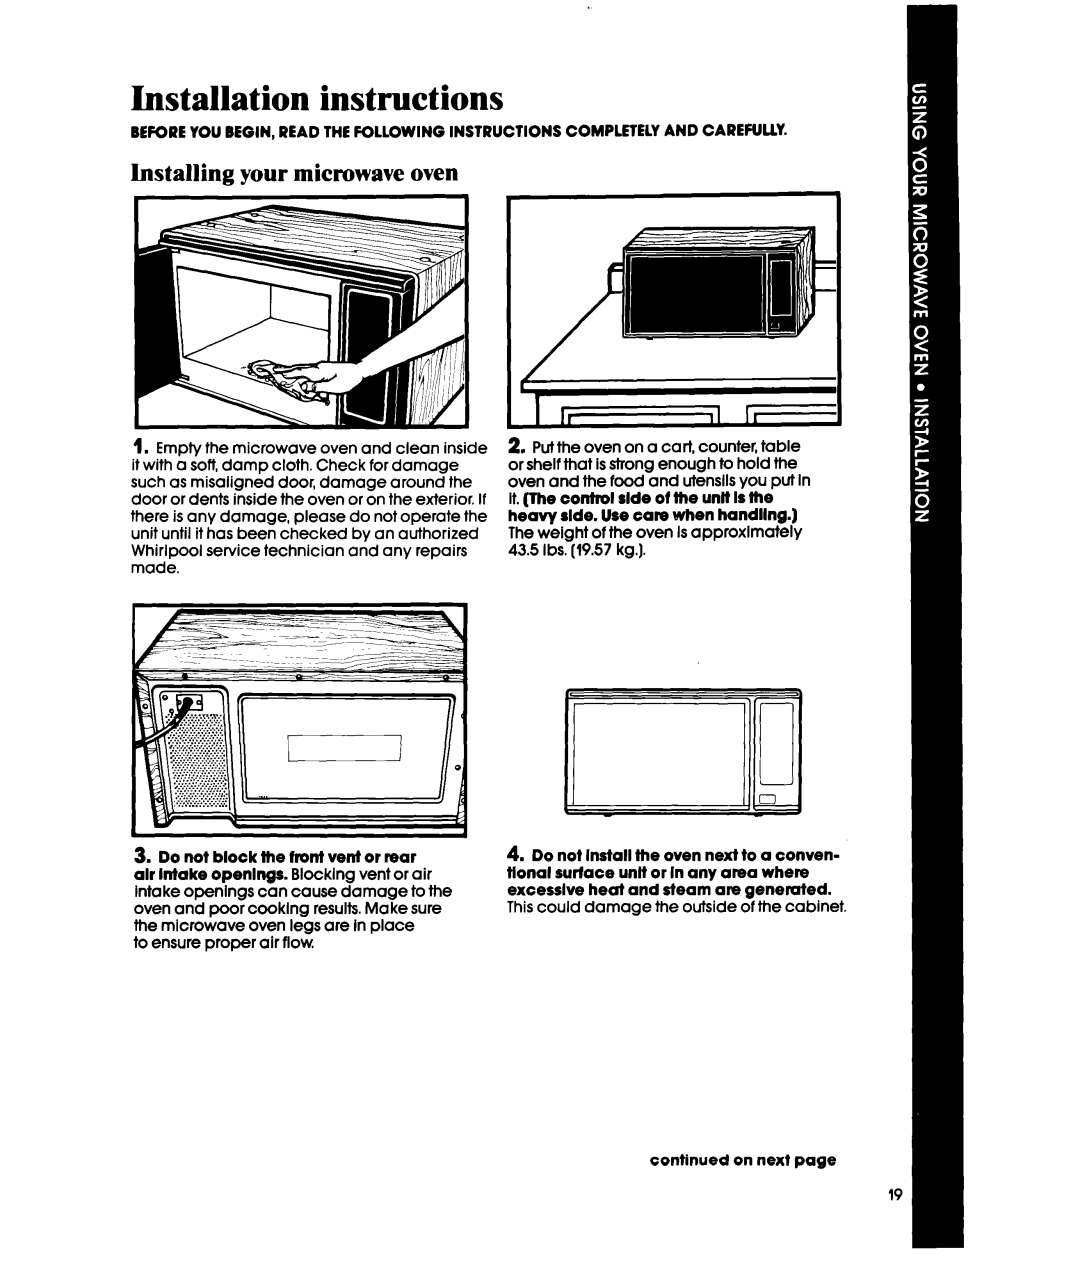 Whirlpool MW3500XS manual Installation instructions, Installing your microwave oven, I’i.~.‘~~.~~.~.C~.~.~ B ““------“I It 